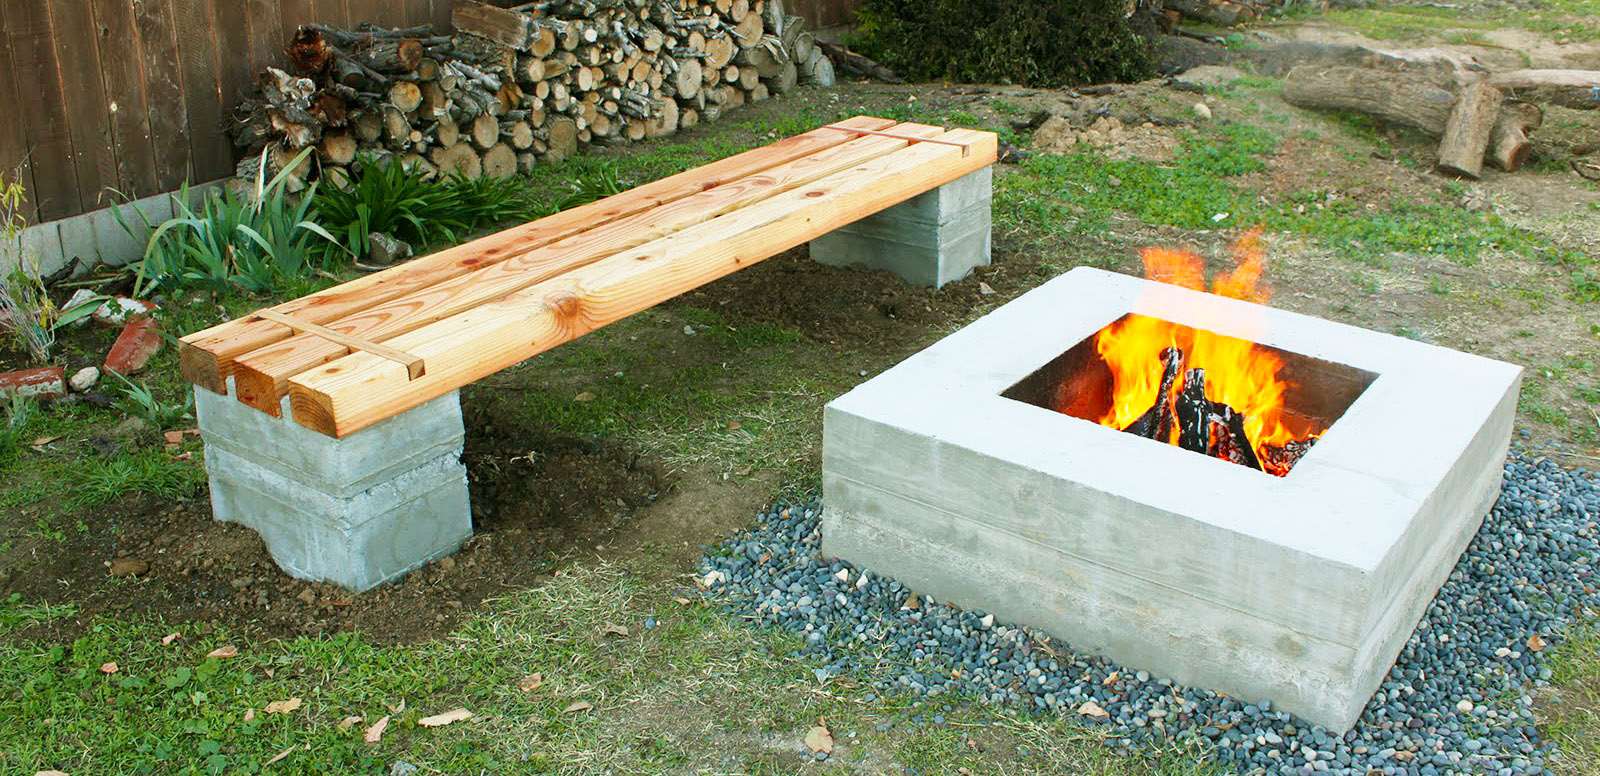 Wood Working Project: Fire Pit Bench DIY | Roy Home Design